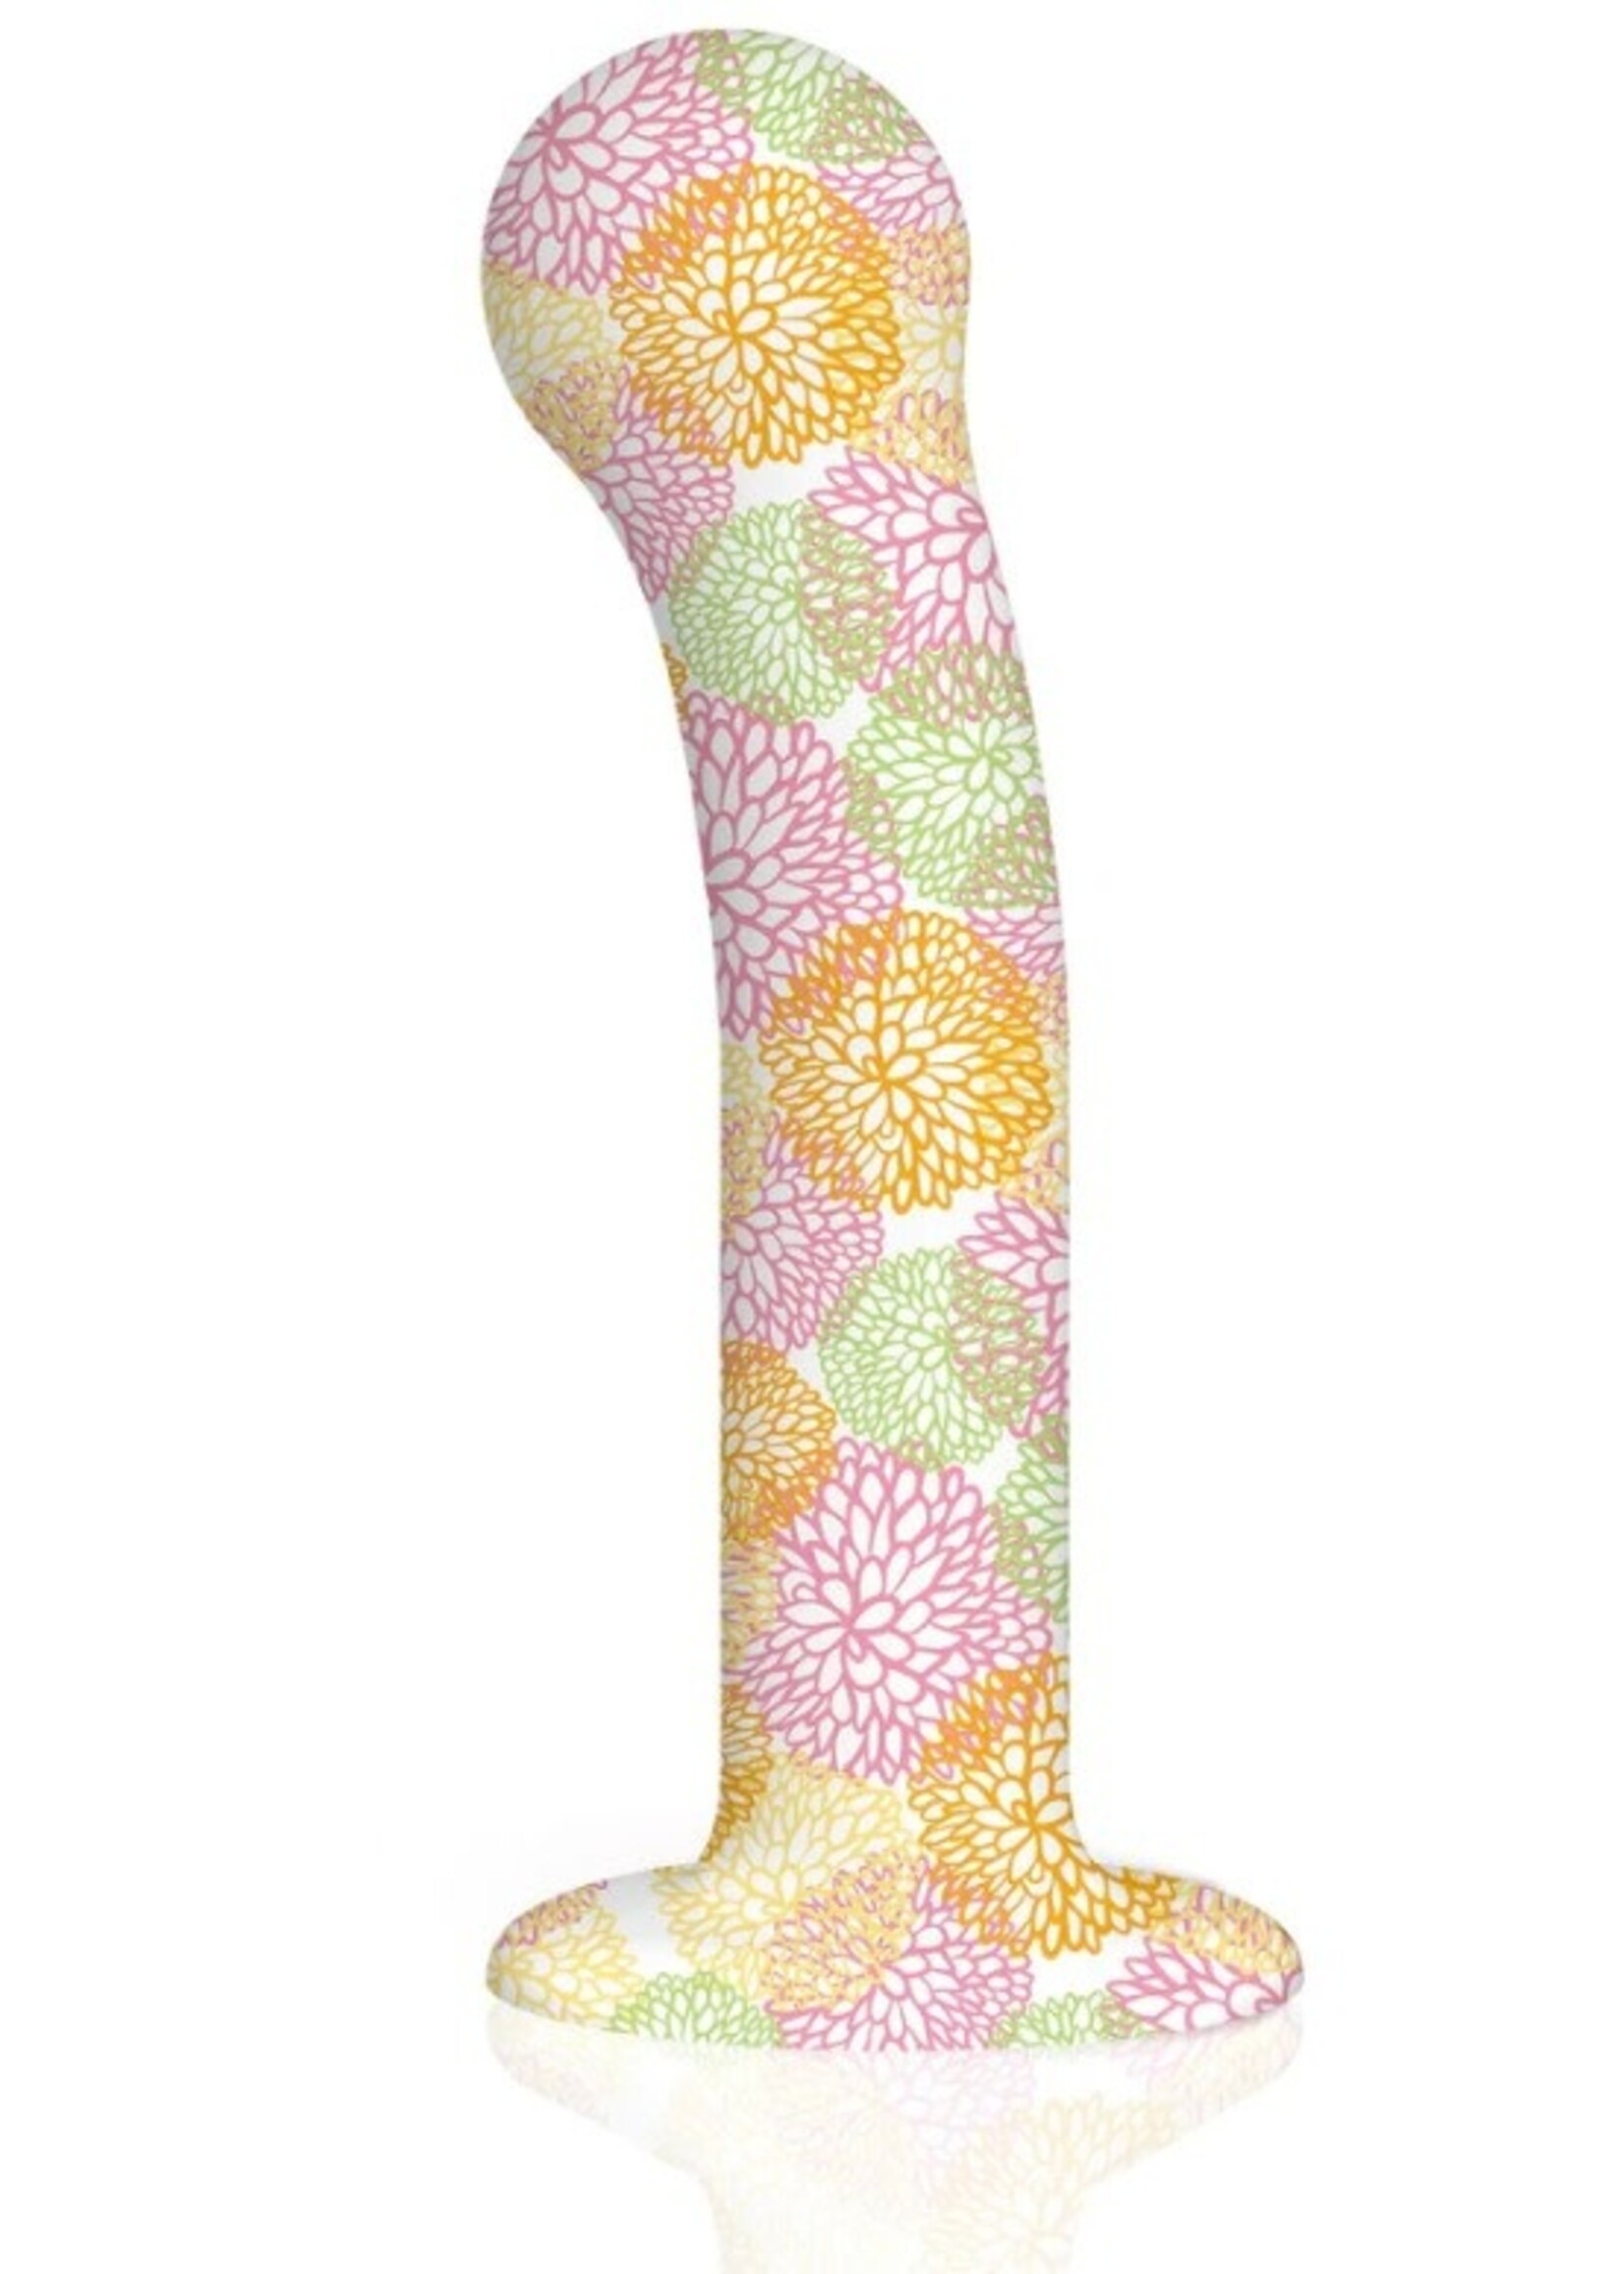 Collage Catch the Bouquet G-Spot Silicone Dildo 6.5 in.